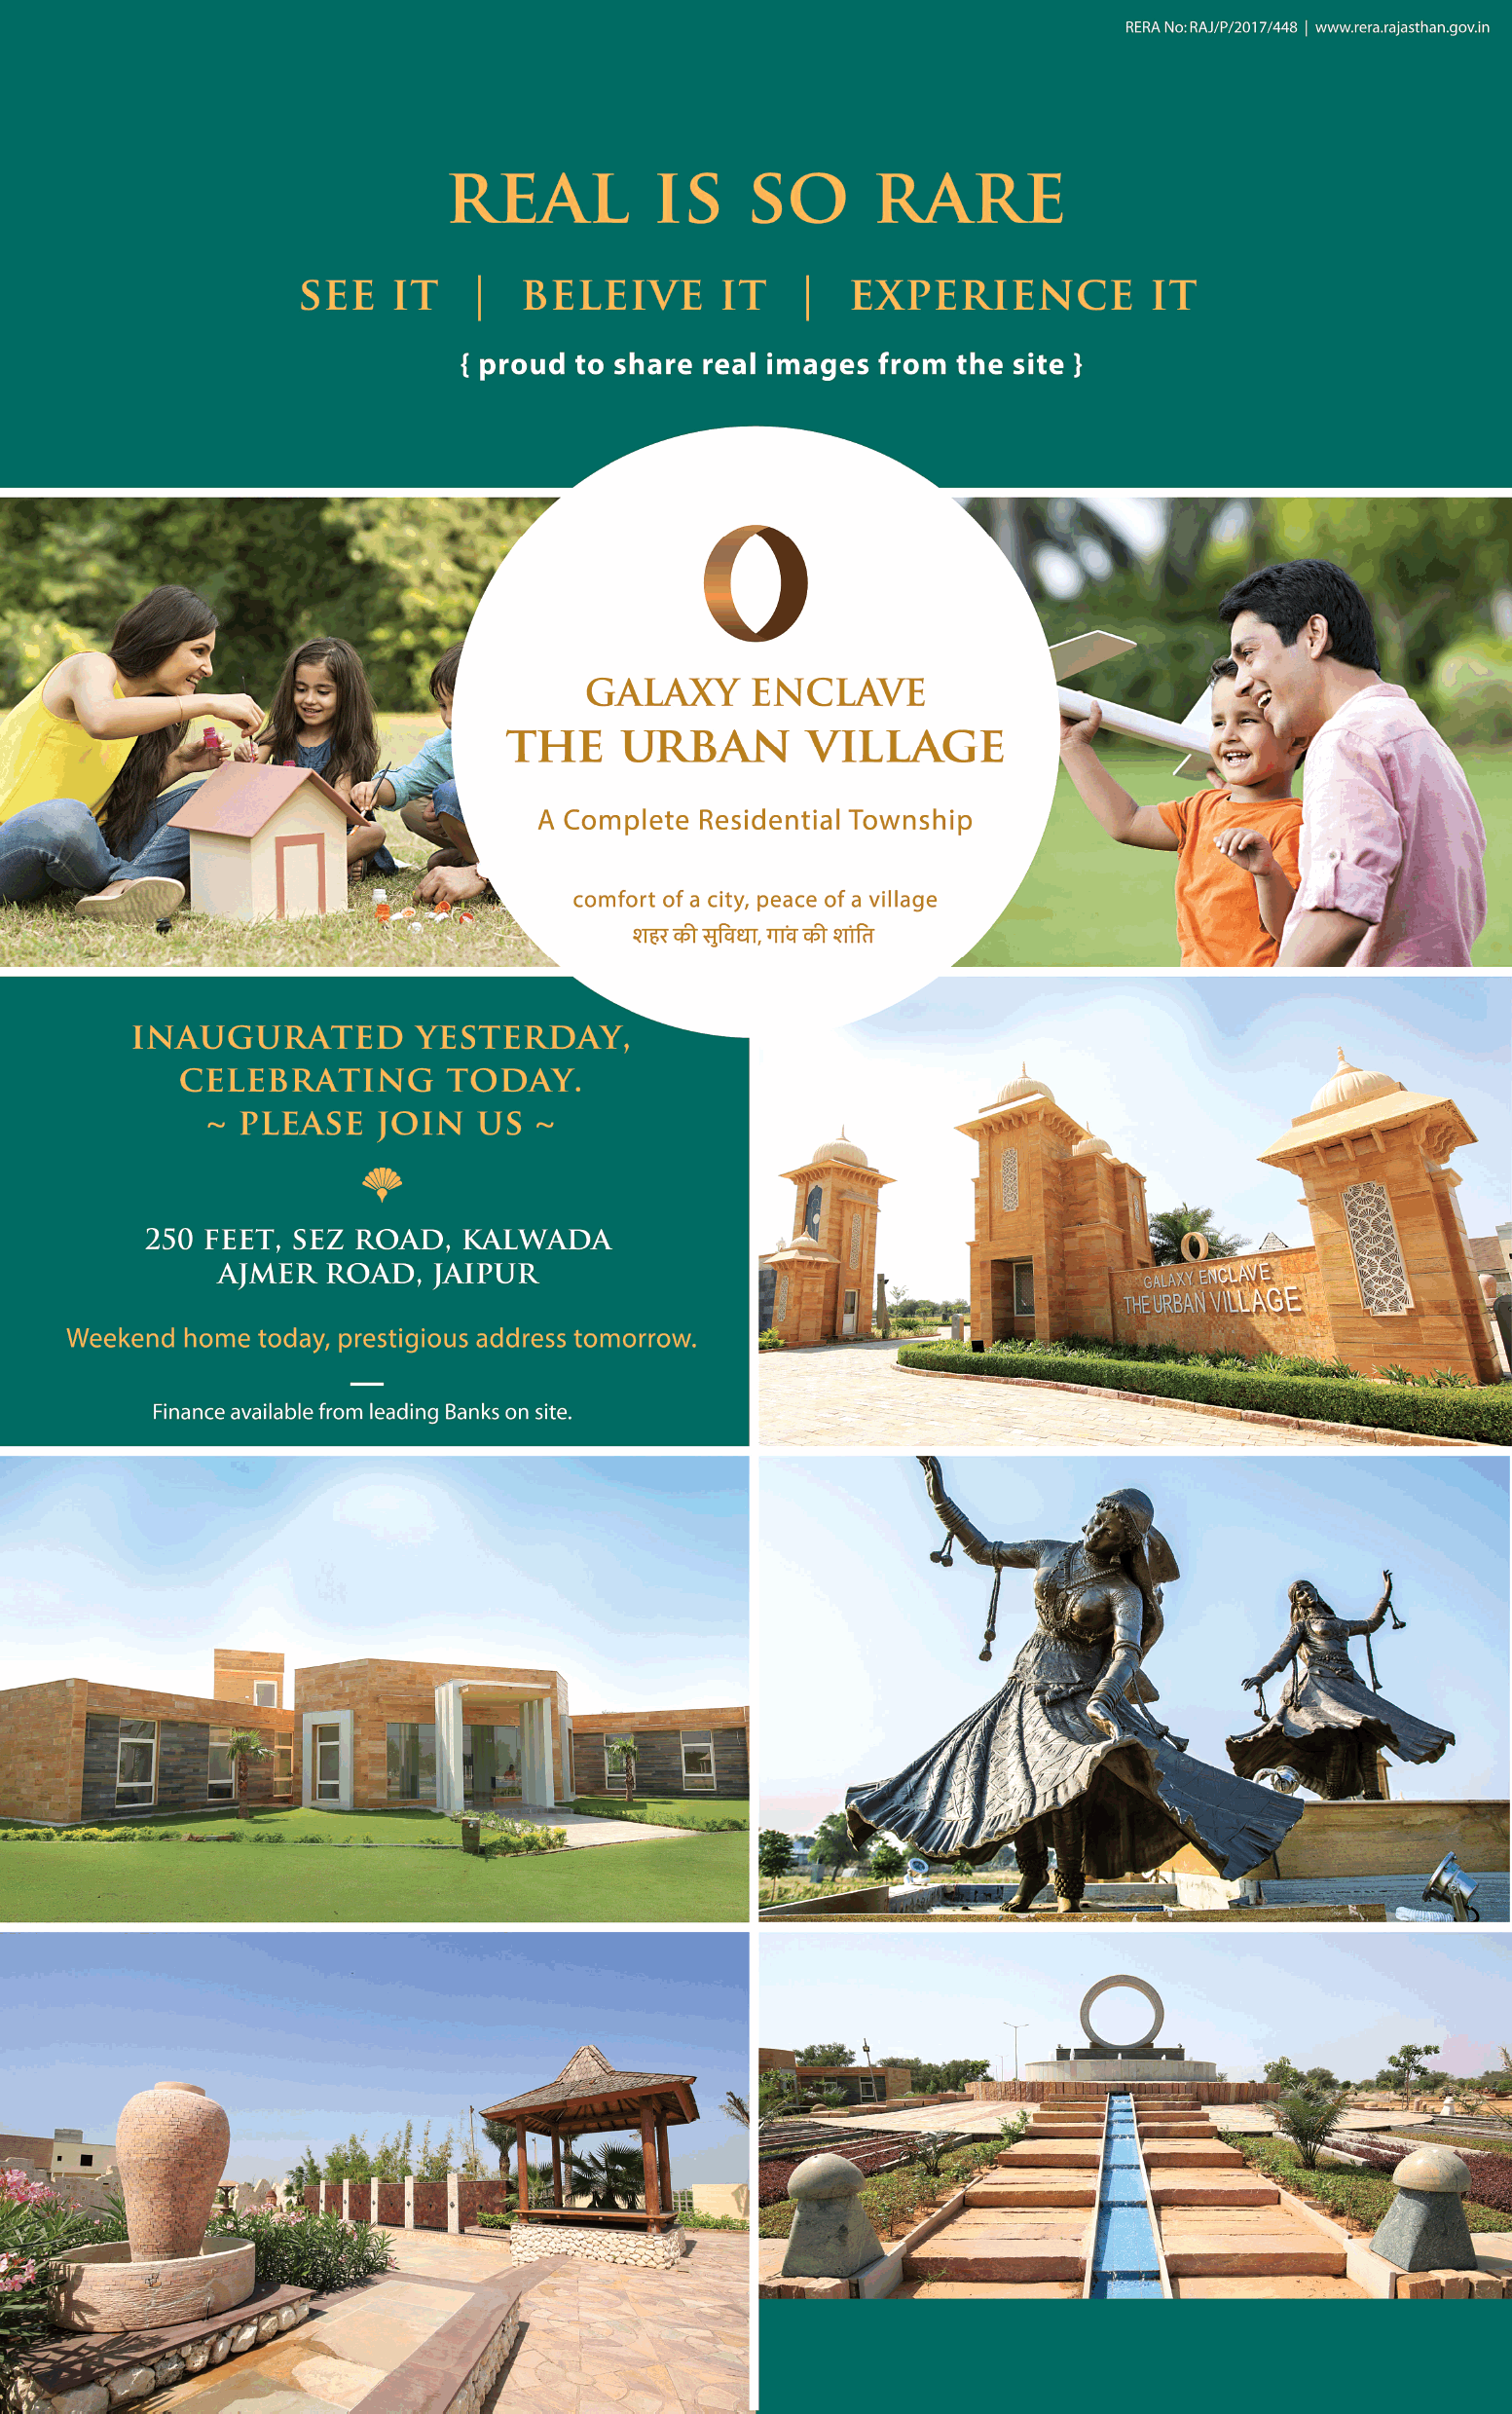 Galaxy Enclave launching a complete residential township in Jaipur